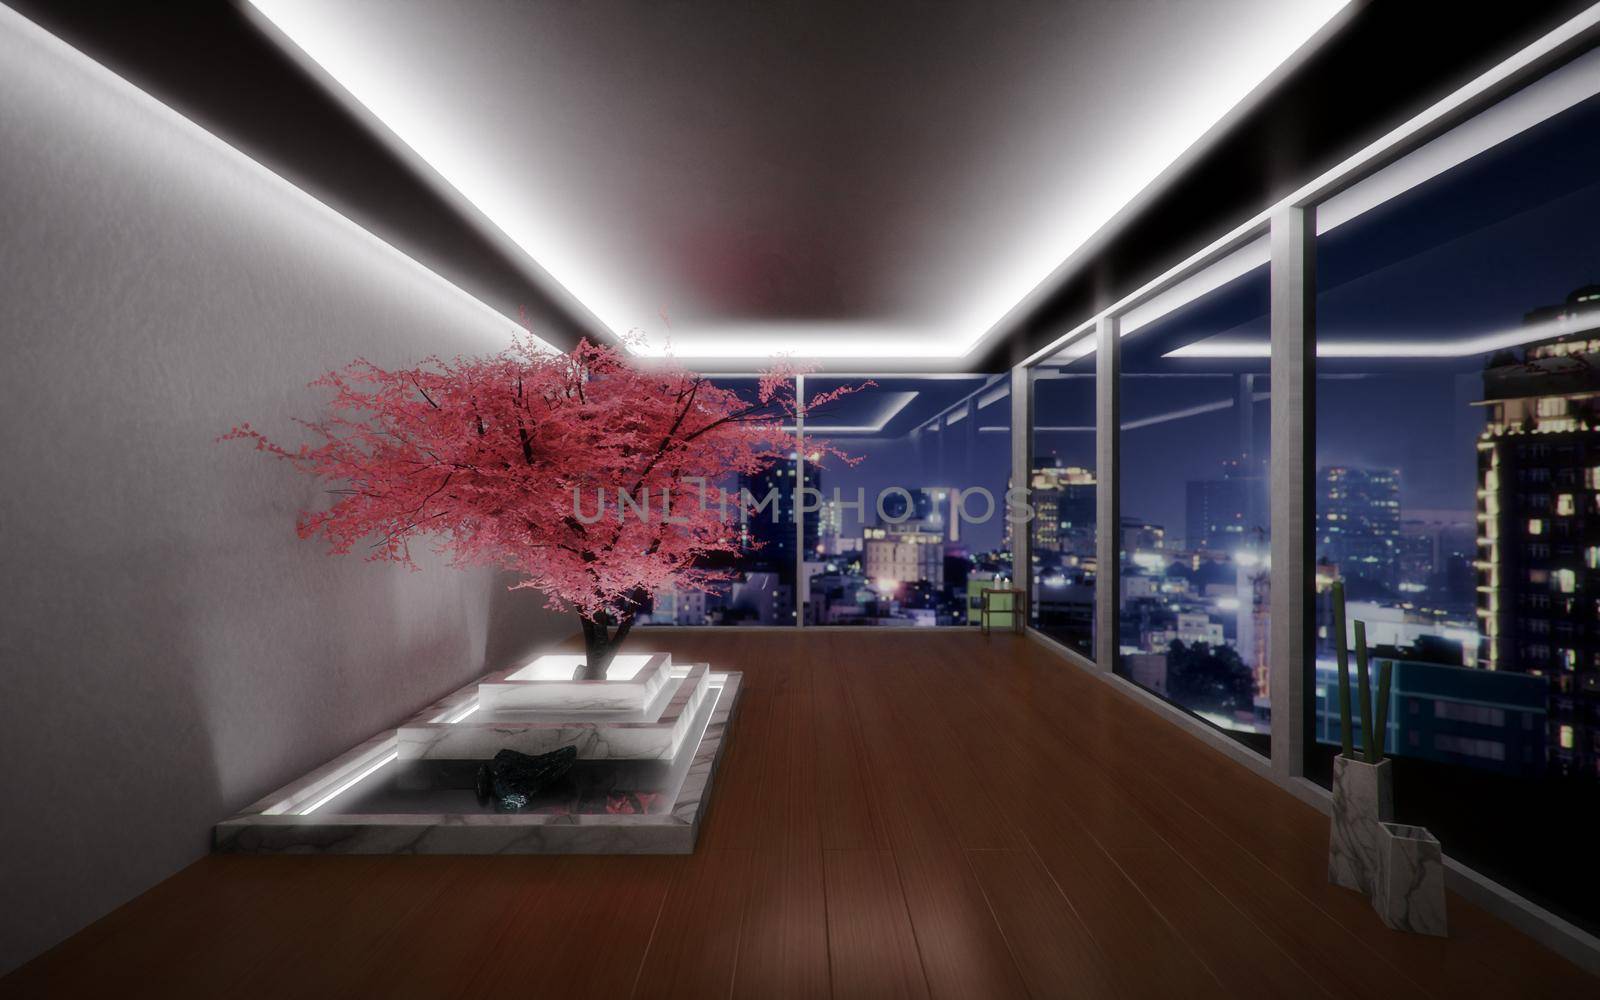 Zen-like room with a pink cherry tree in an interior space with view to a city at night. Modern architecture, decoration. Digital render. by hernan_hyper